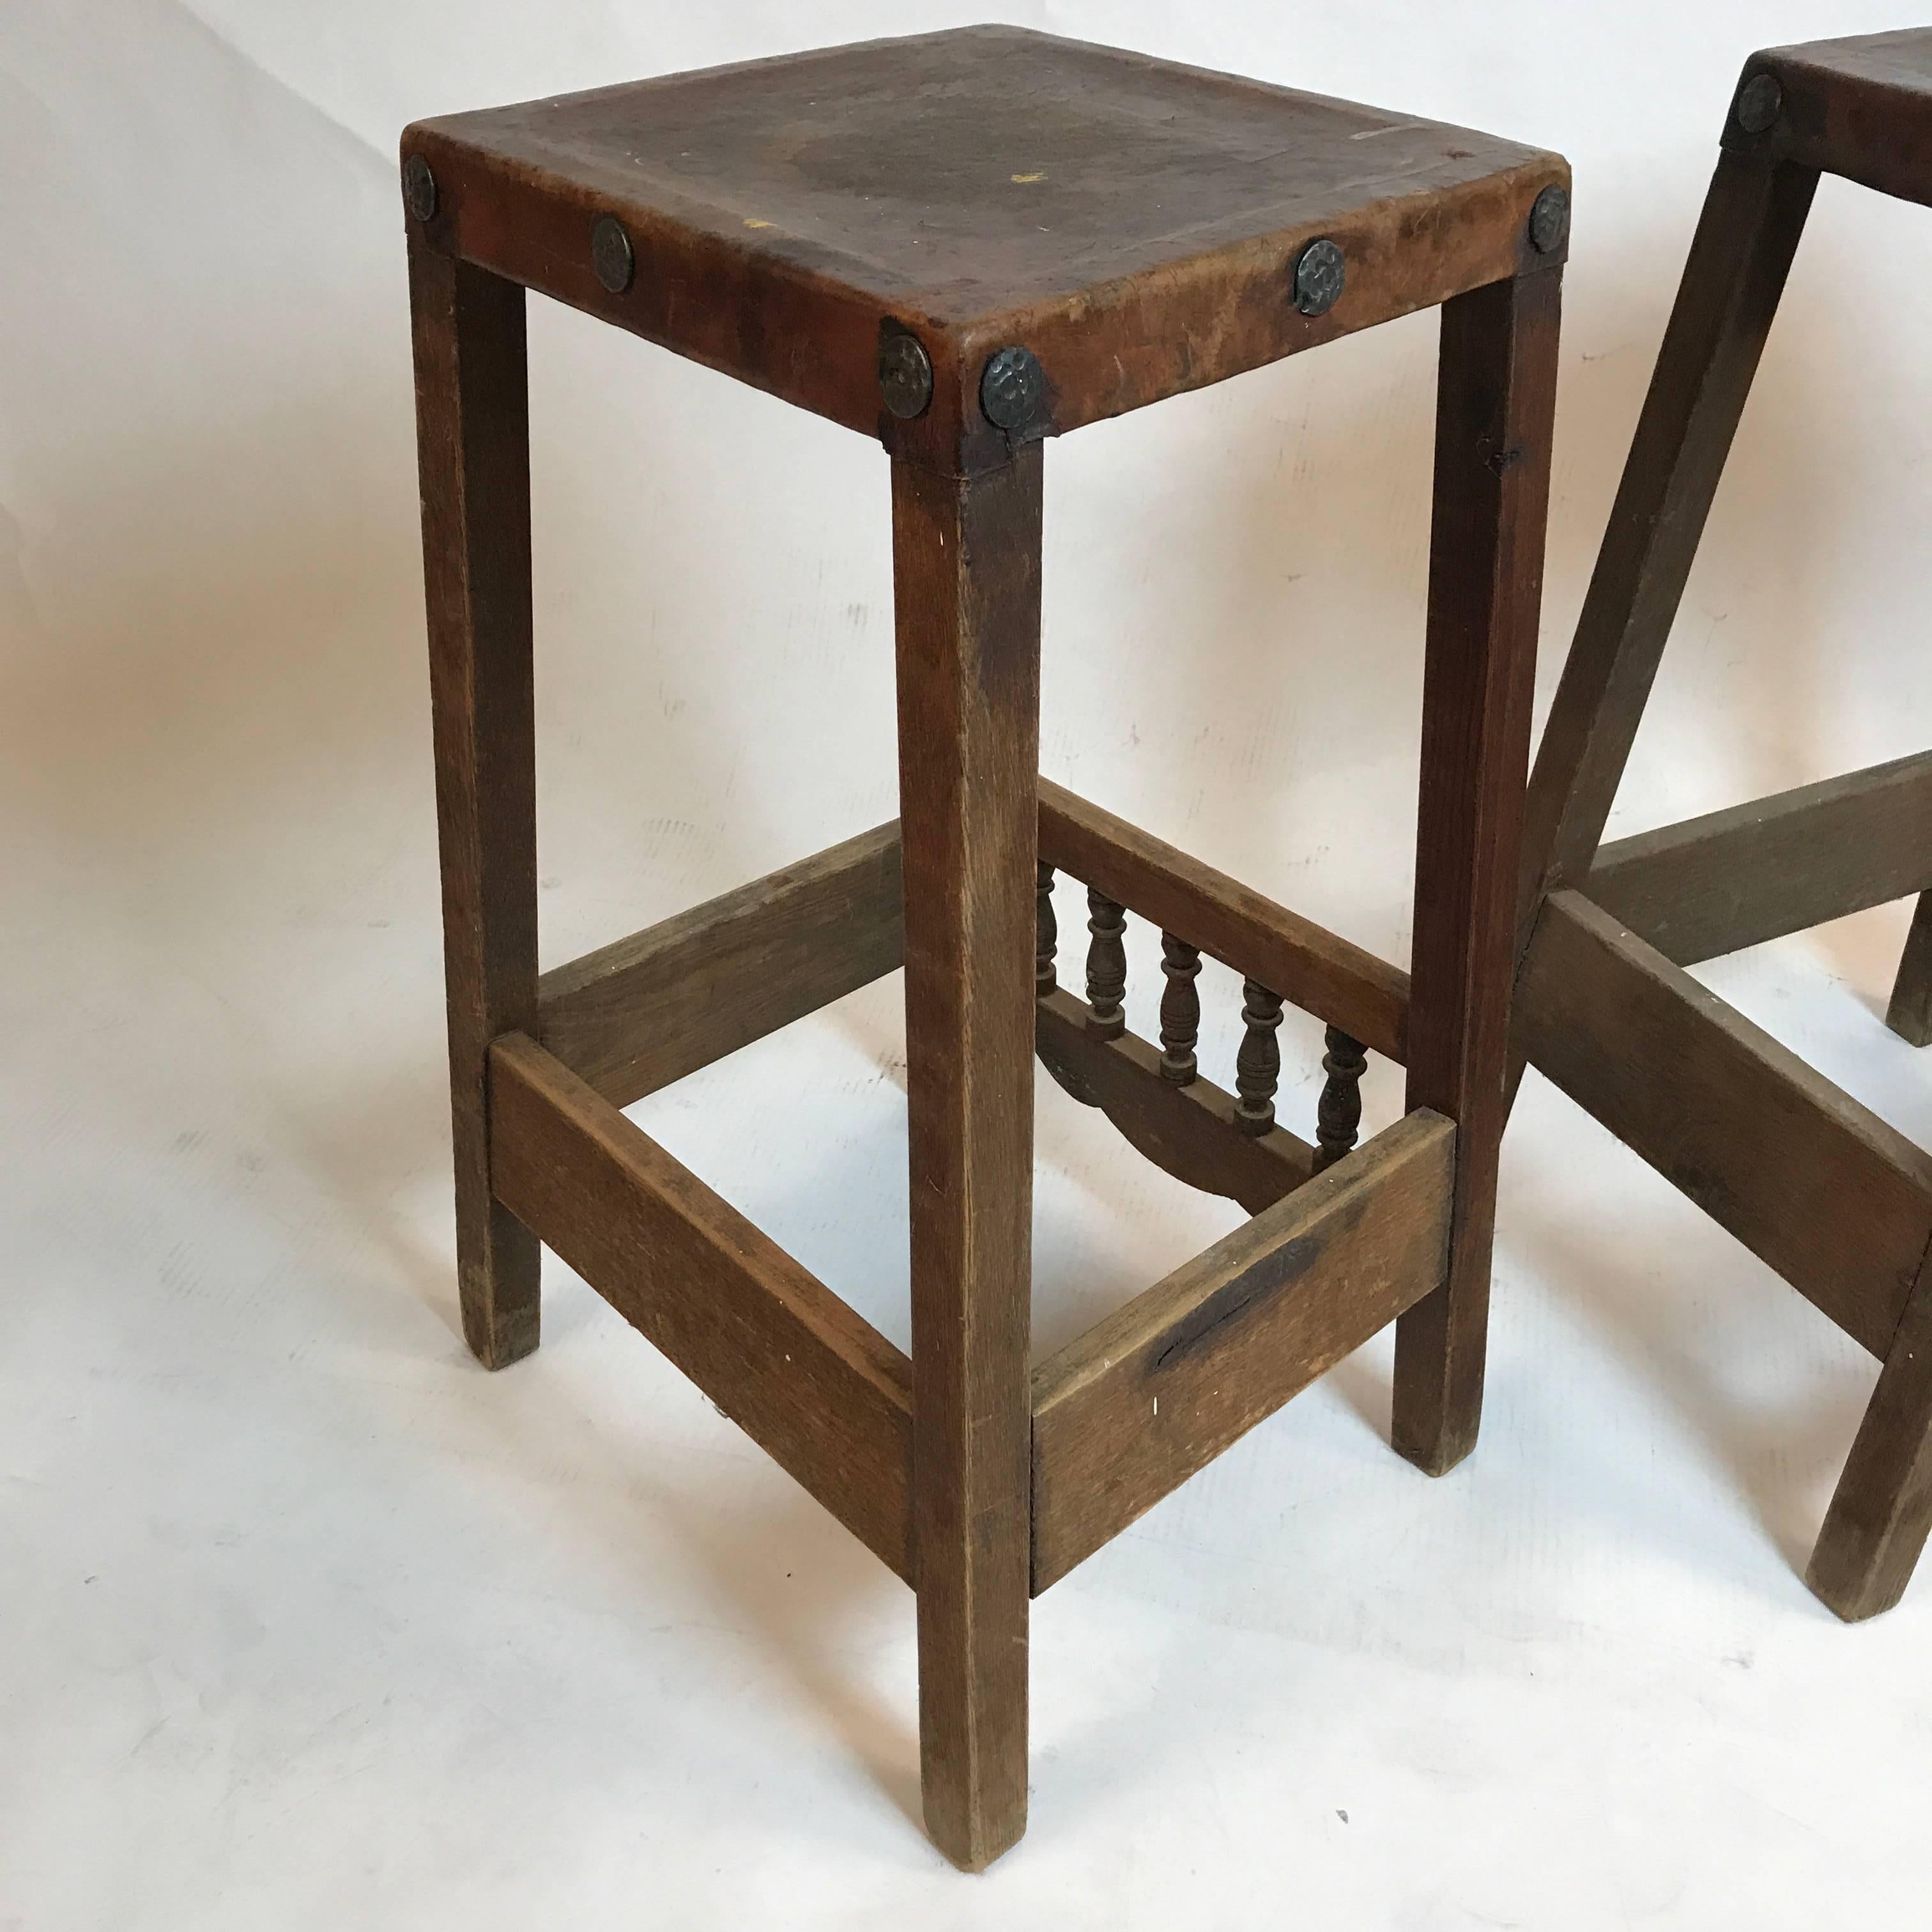 20th Century Early American Rustic Folk Art Leather & Wood with Hand-Forged Detail Bar Stools